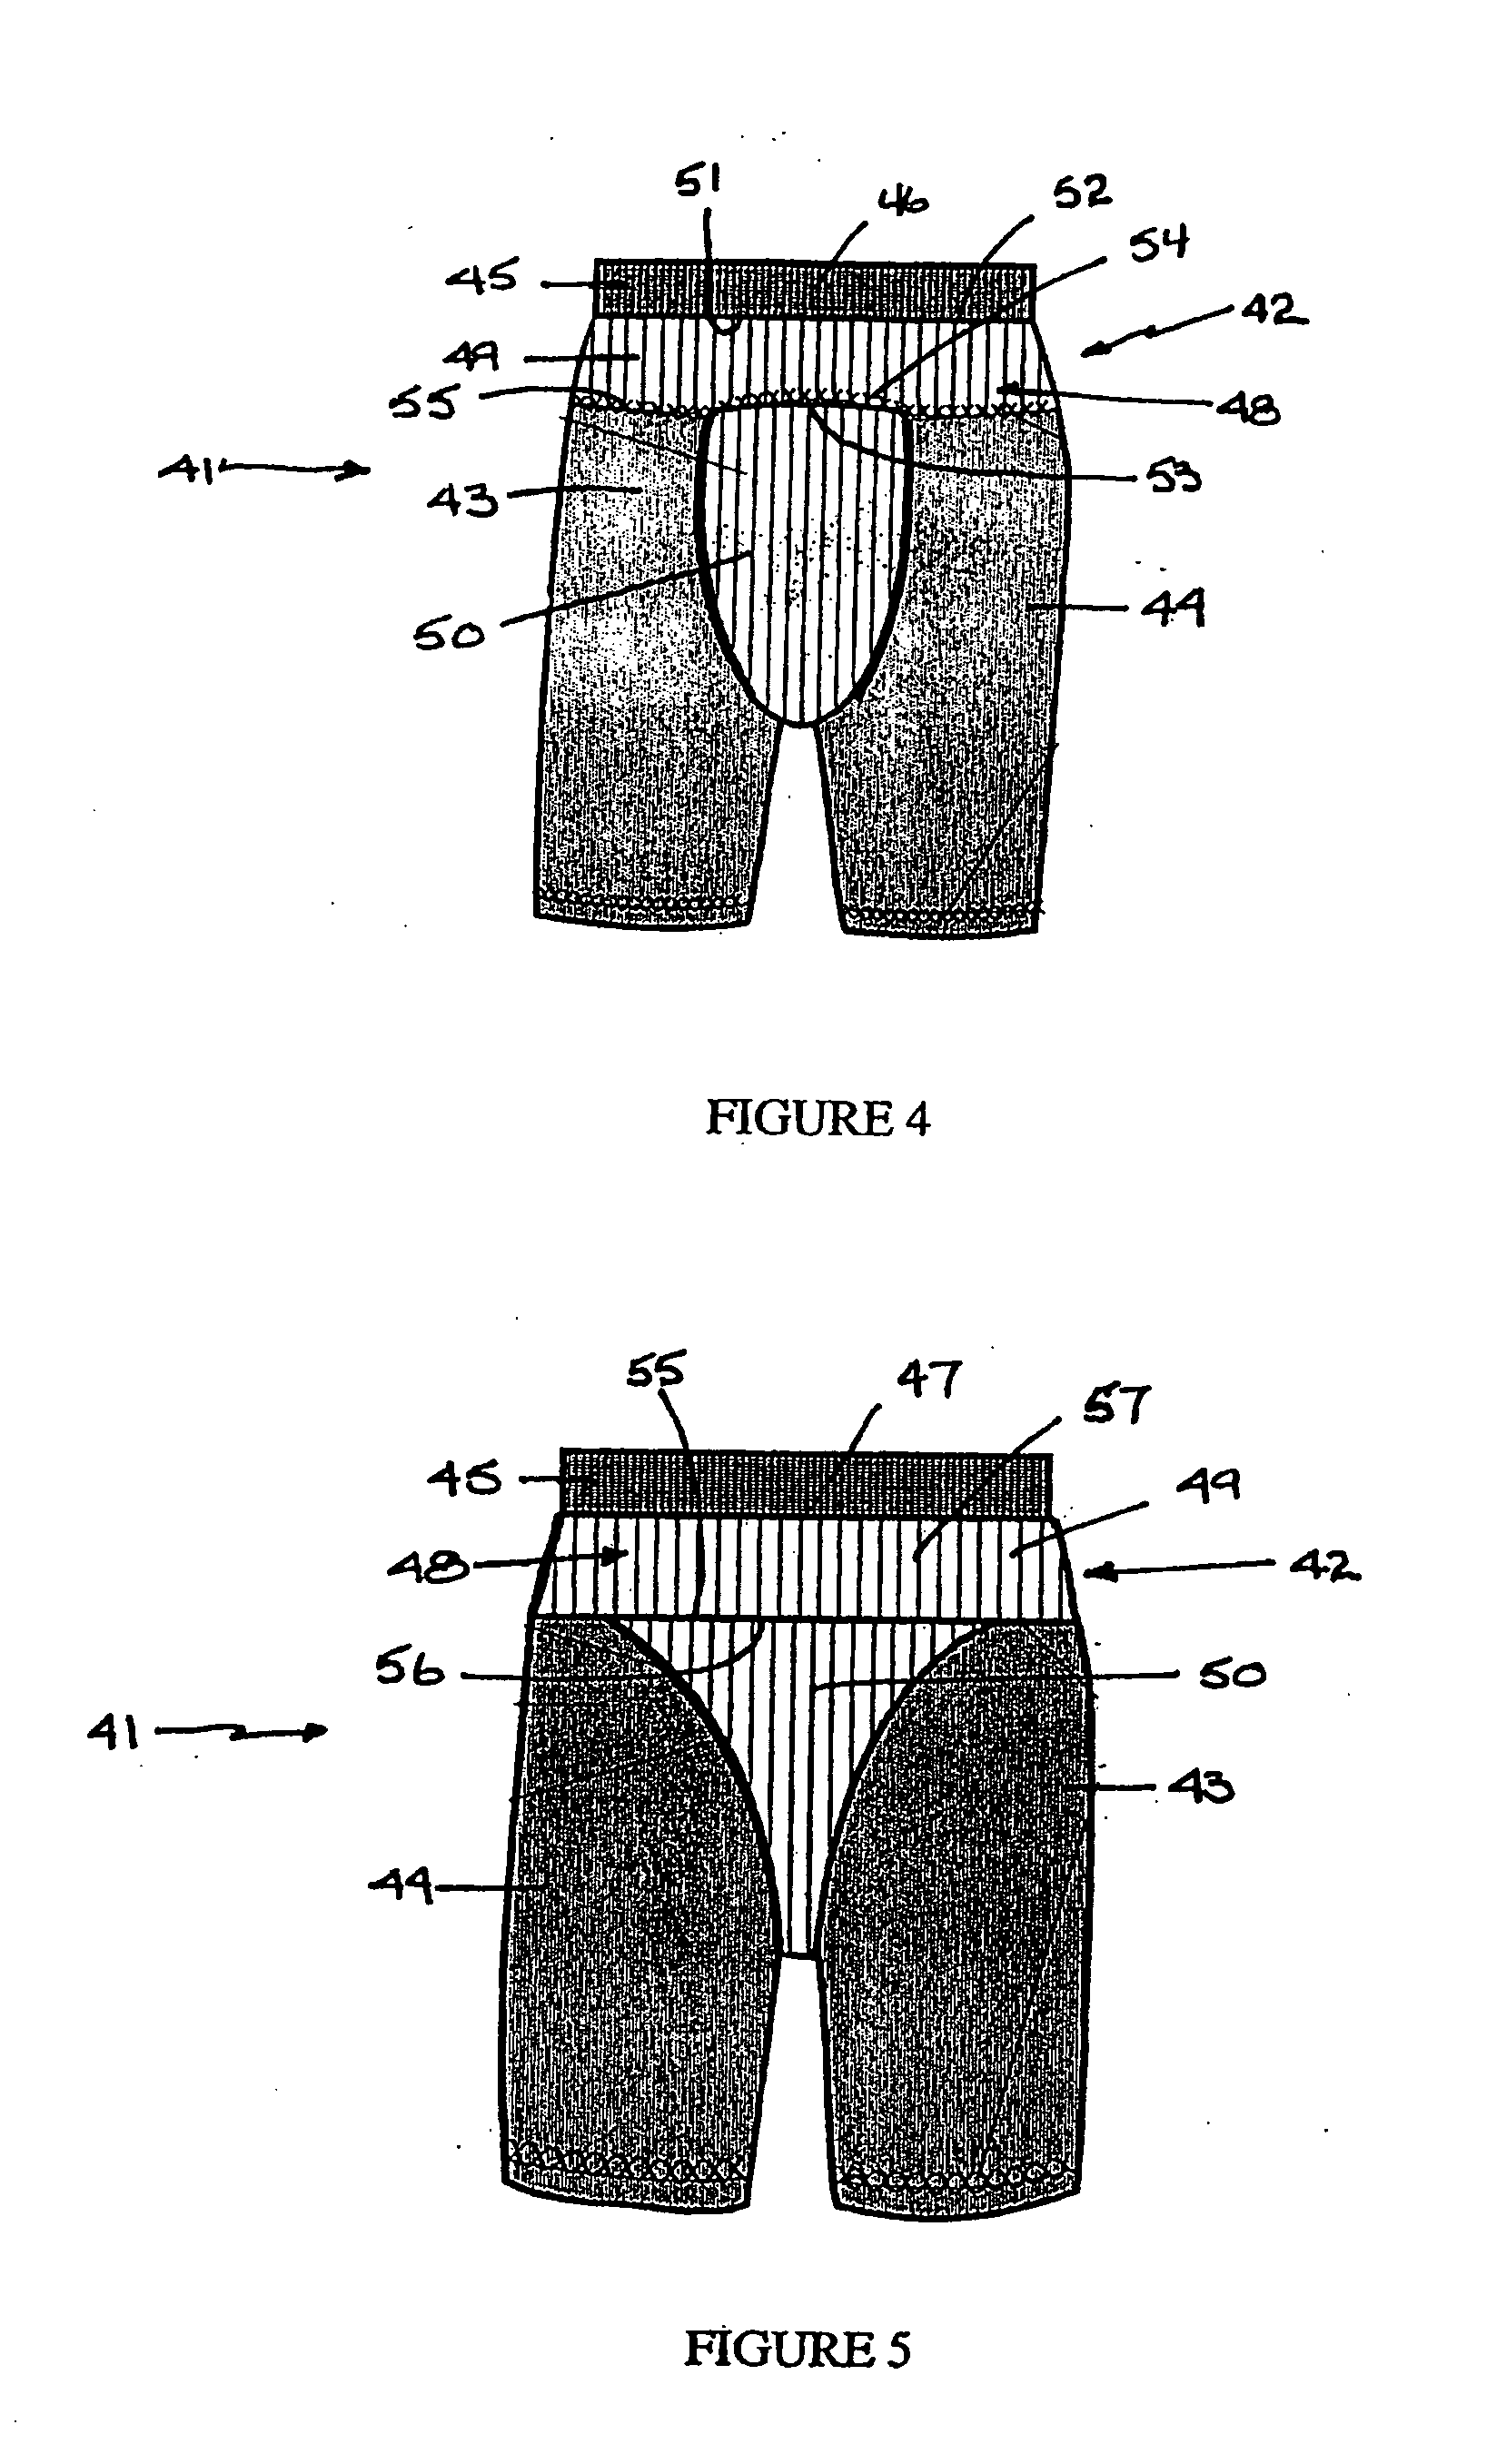 Athletic support garment